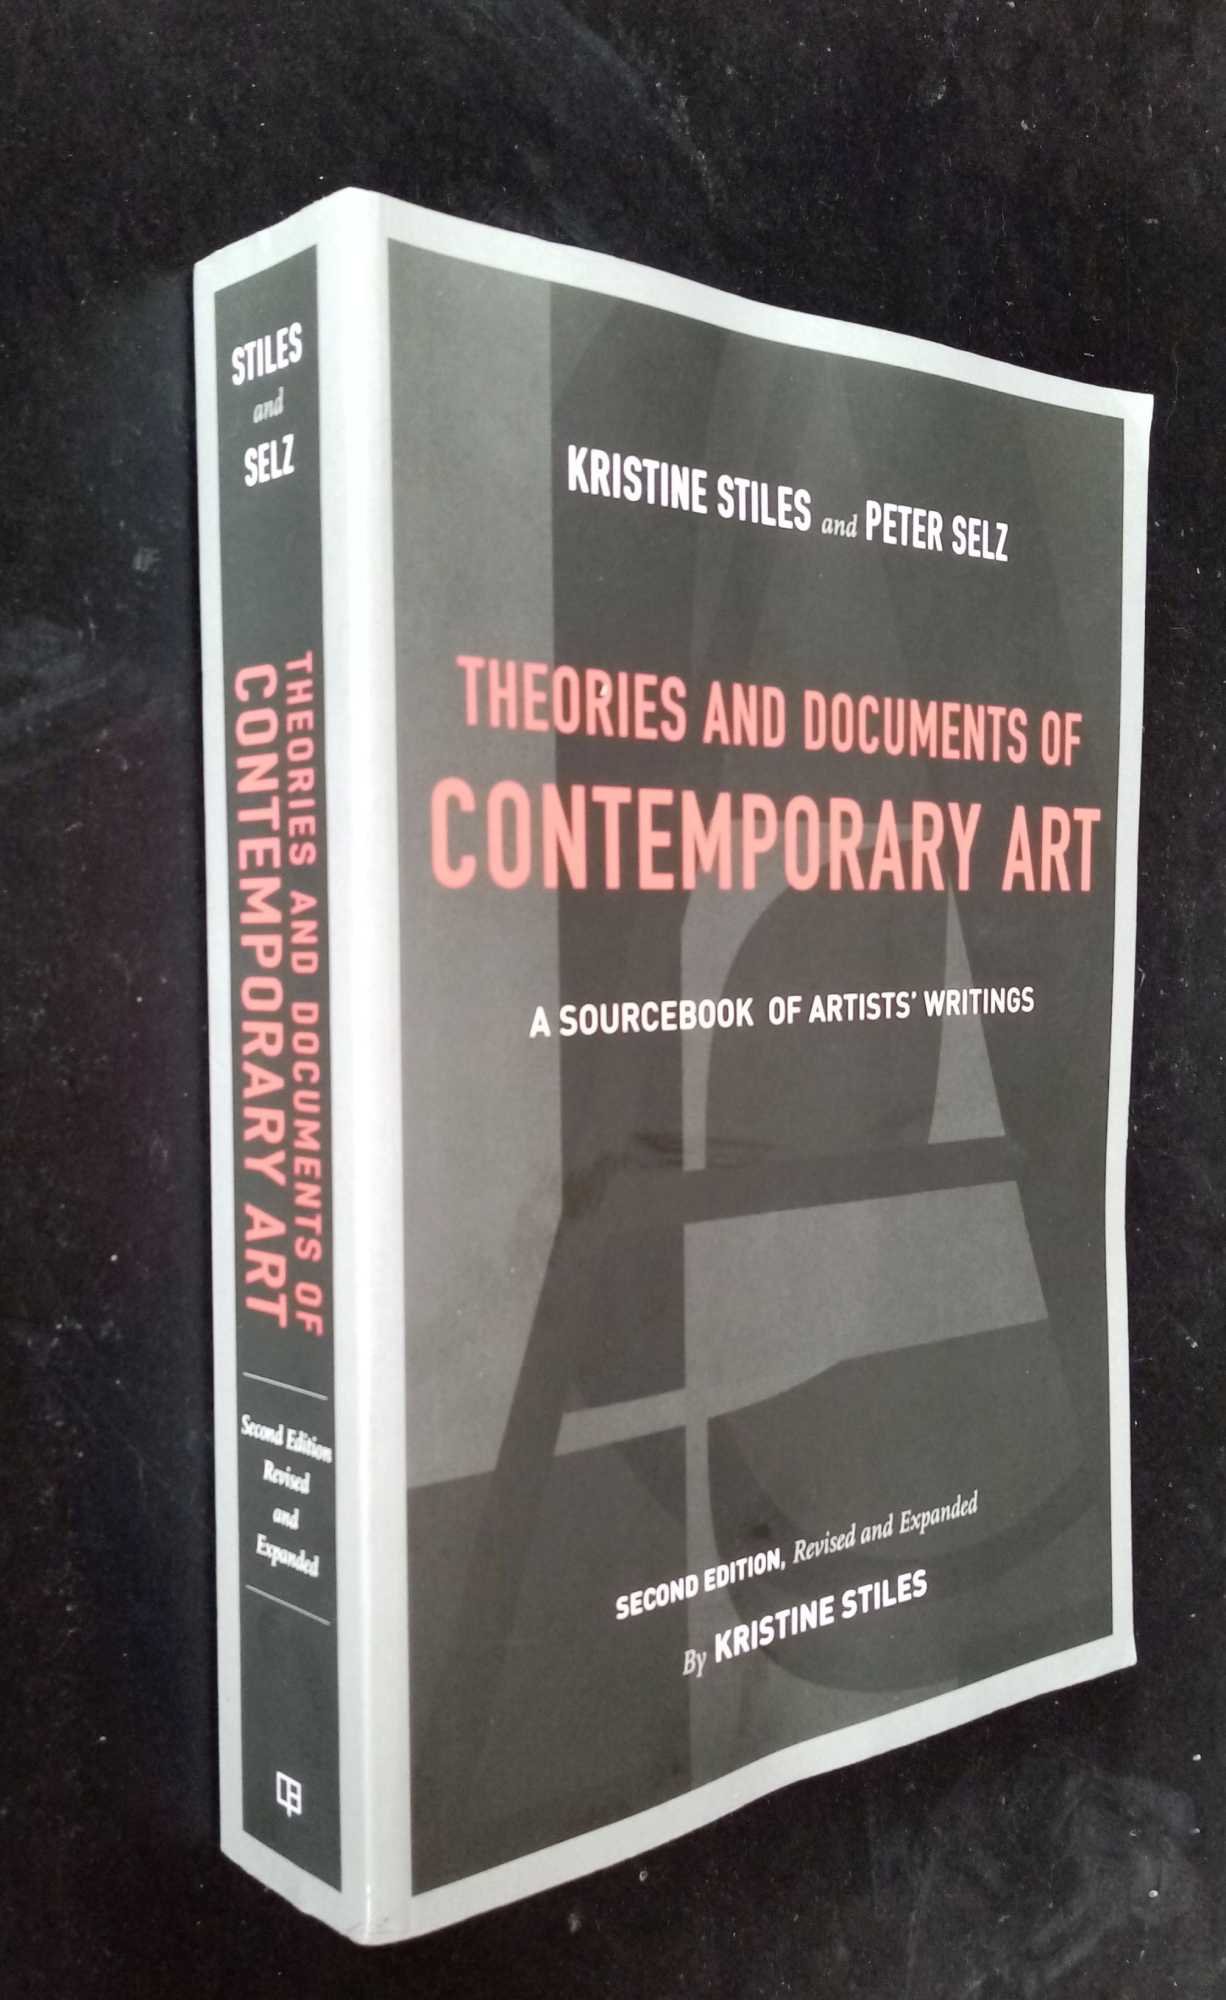 Kristine Stiles - Theories and Documents of Contemporary Art: A Sourcebook of Artists' Writings. 2nd Edition - Revised and Expanded